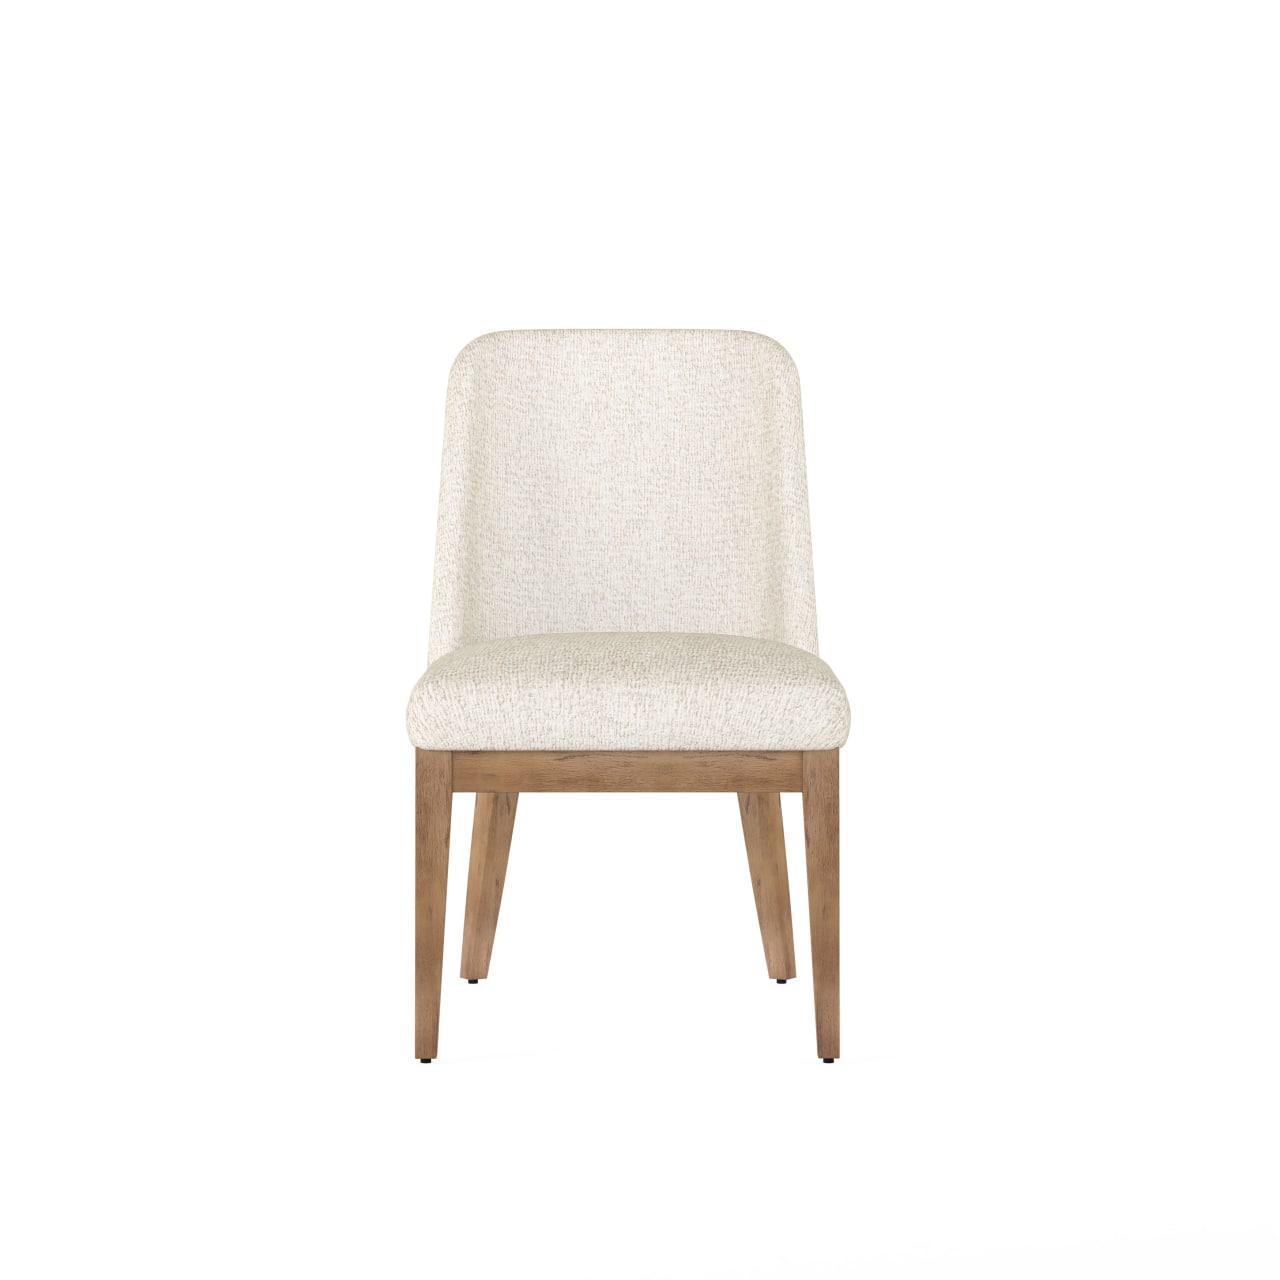 a.r.t. furniture Portico Dining Chair Set